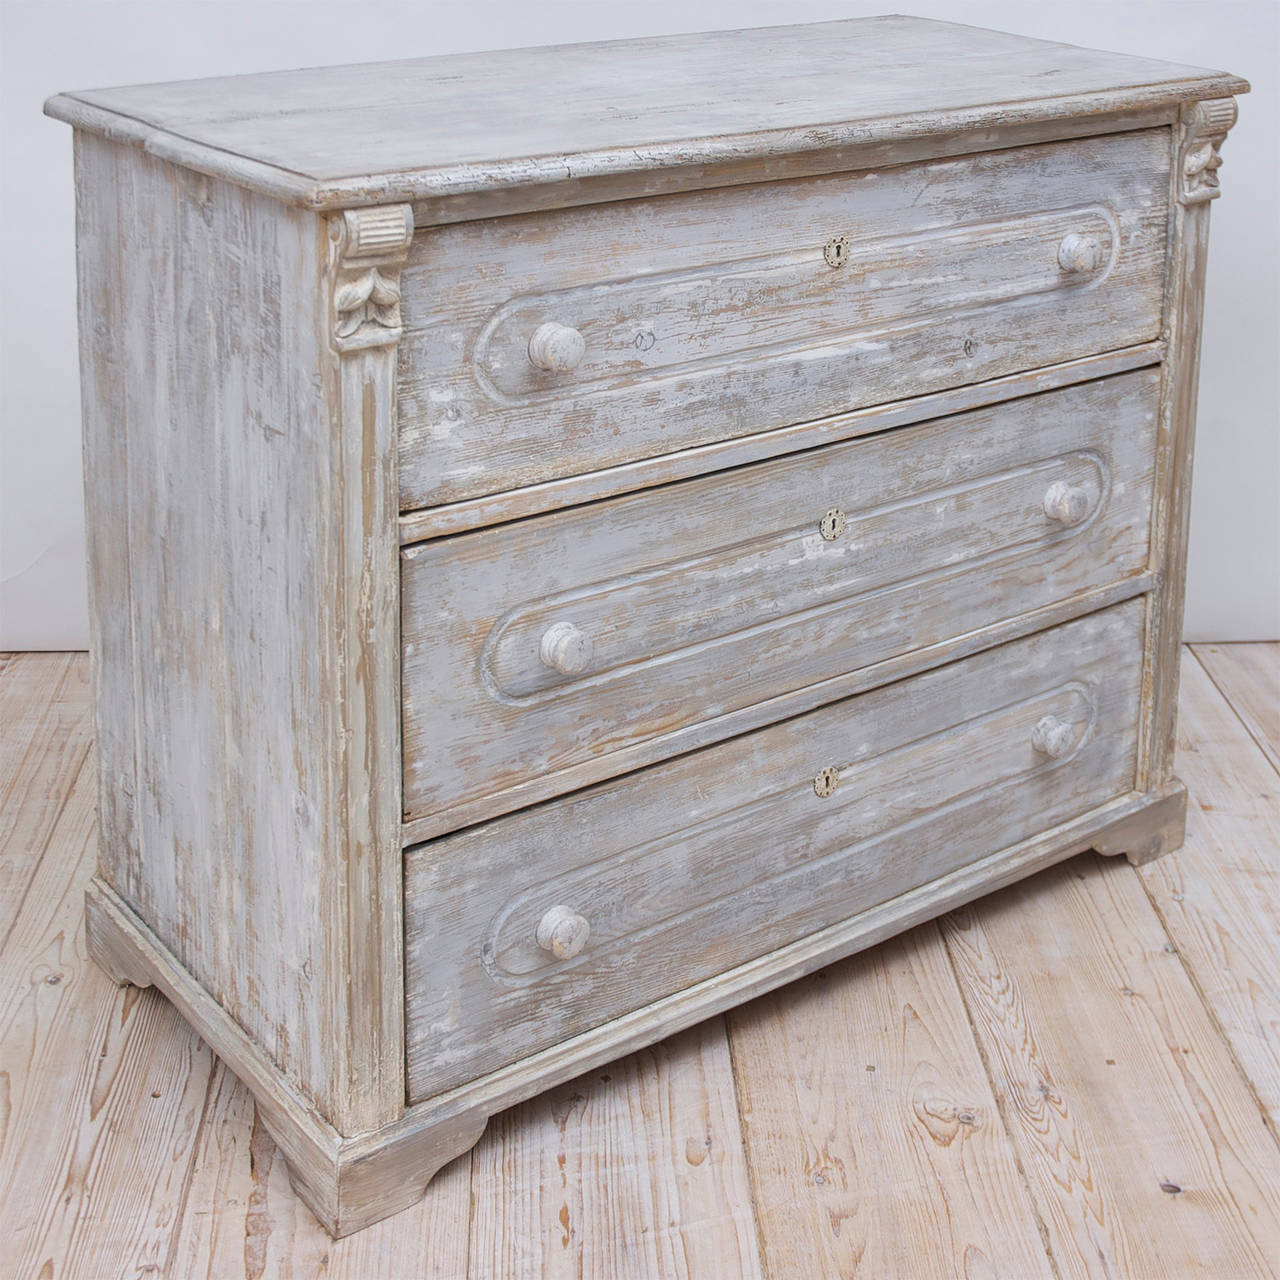 From the Austria-Hungarian Empire, a painted country chest with three large drawers flanked on the corners by a fluted molding capped with carved acorns. Offers original locks. Wooden pulls and bracket feet were added at some point in its history.